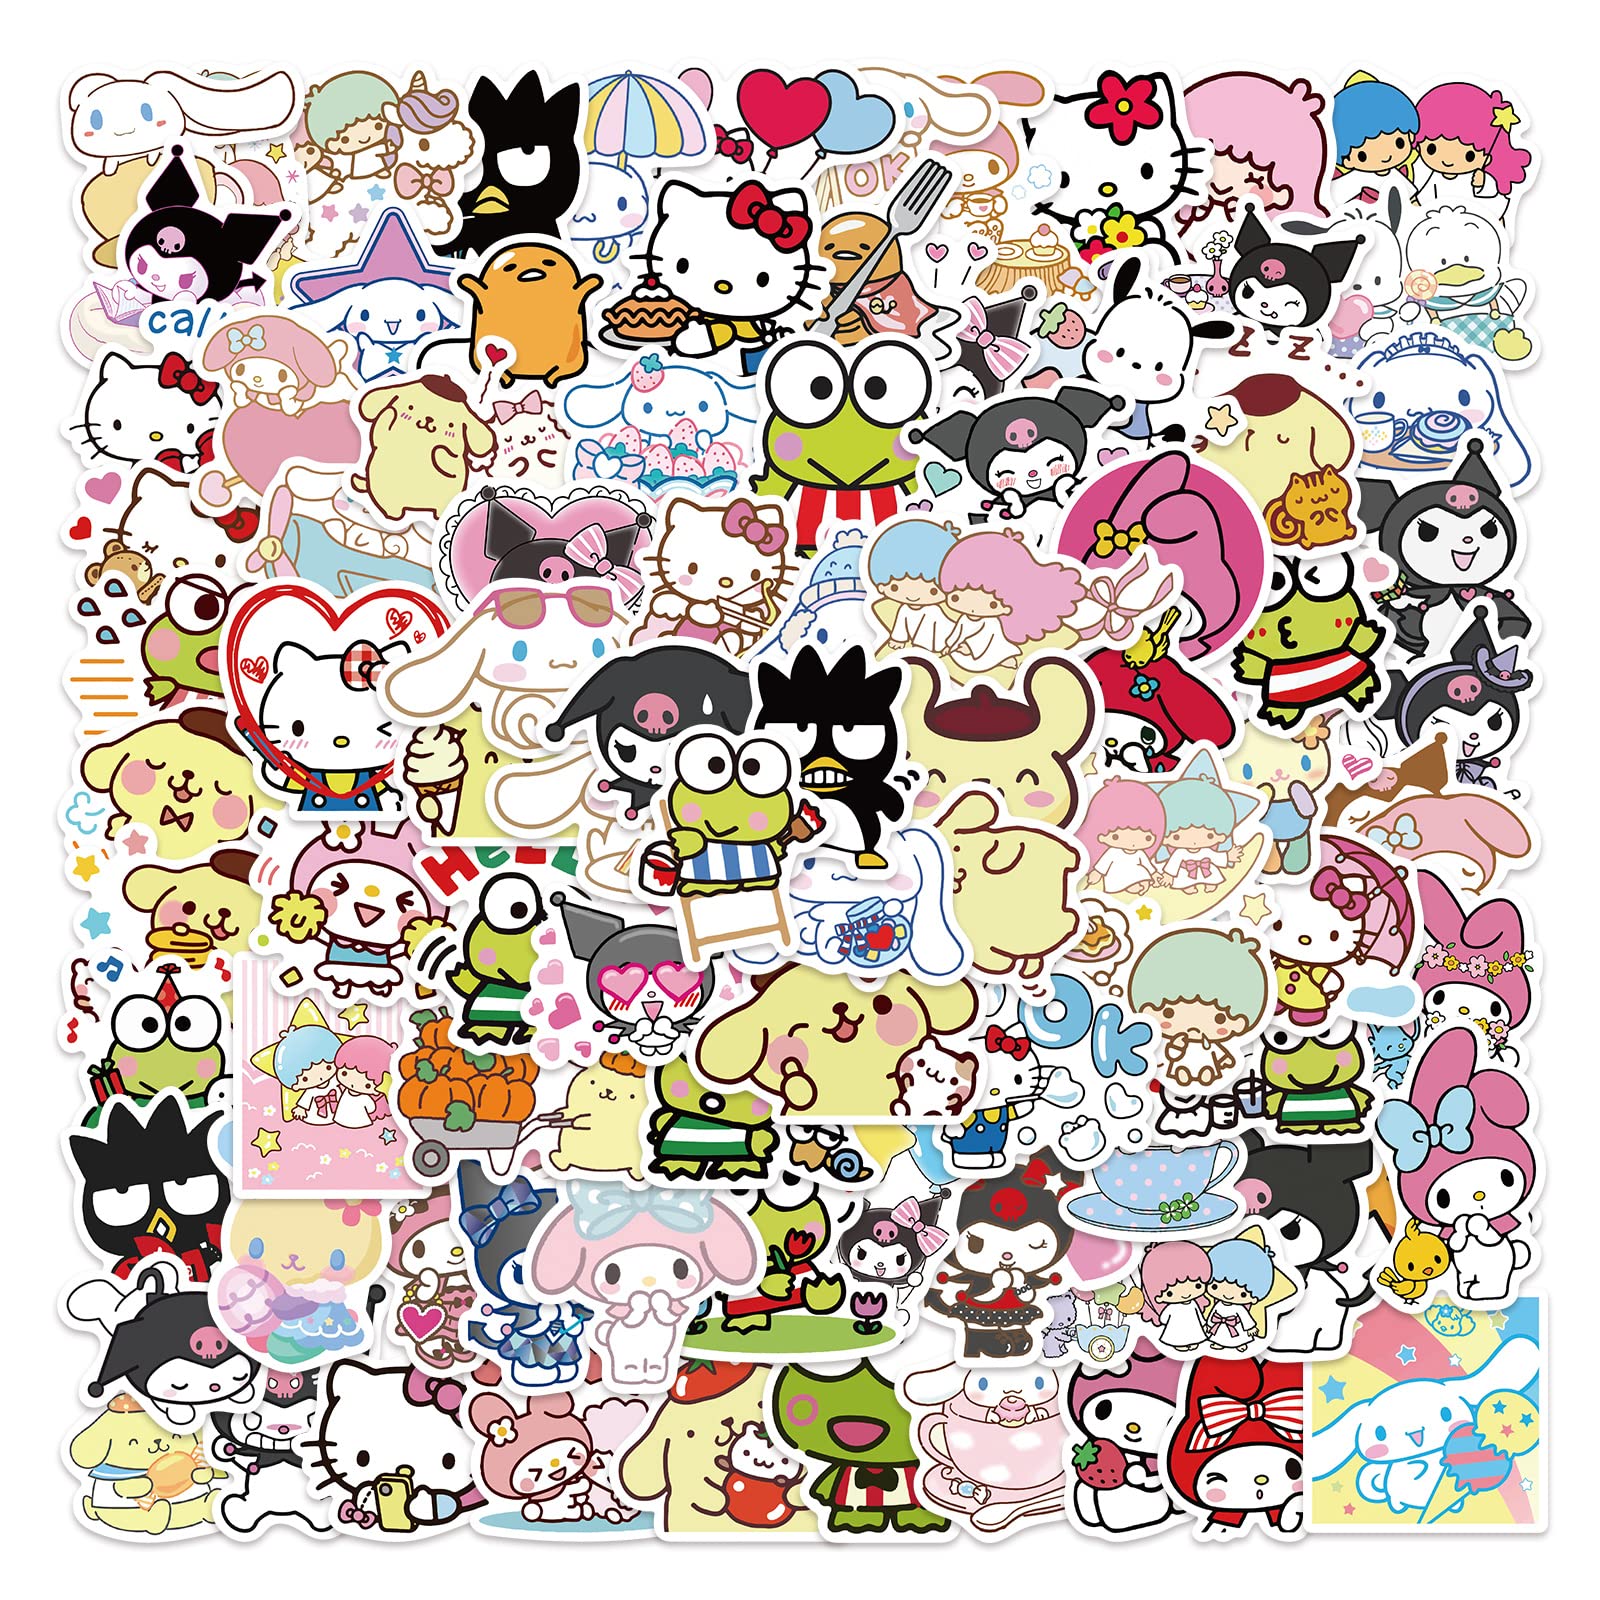 100Pcs Cute Stickers Pack Hello Kitty Stickers MyMelody&Kuromi Stickers Cinnamoroll Pompompurin Keroppi Pochaco Stickers Decals Assorteds Kawaii Sticker Gifts for Kids Teens Girls Adults : Toys & Games